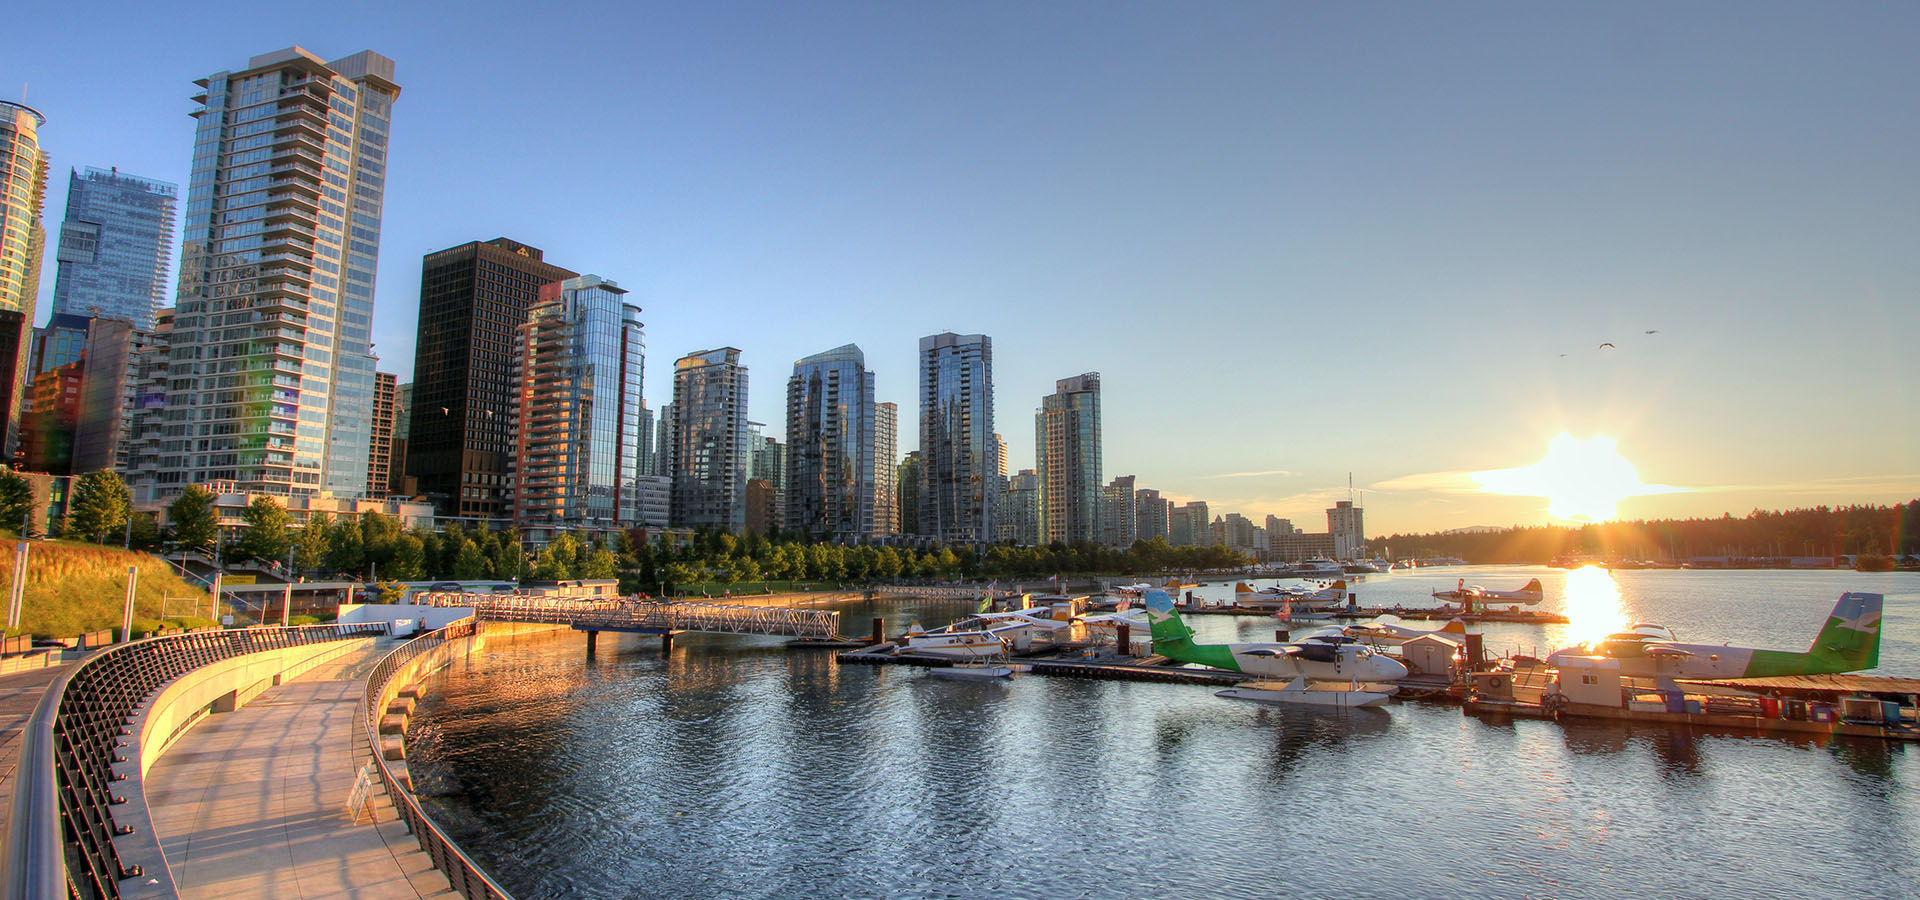 Amazing Coal Harbour Pictures & Backgrounds